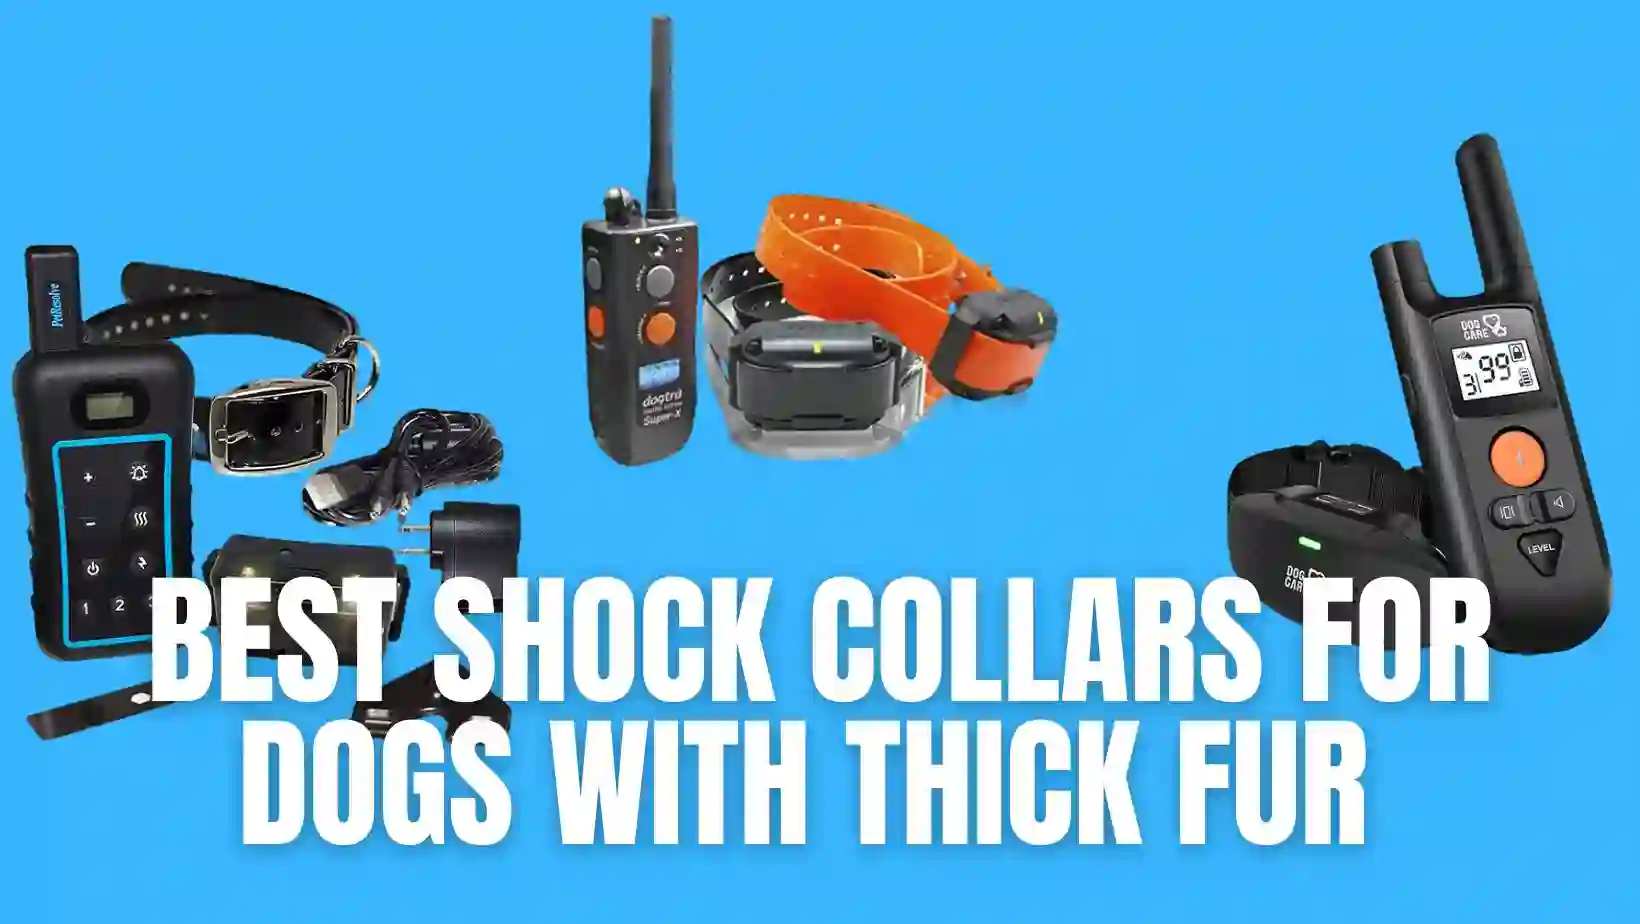 Best Shock Collars for Dogs with Thick Fur